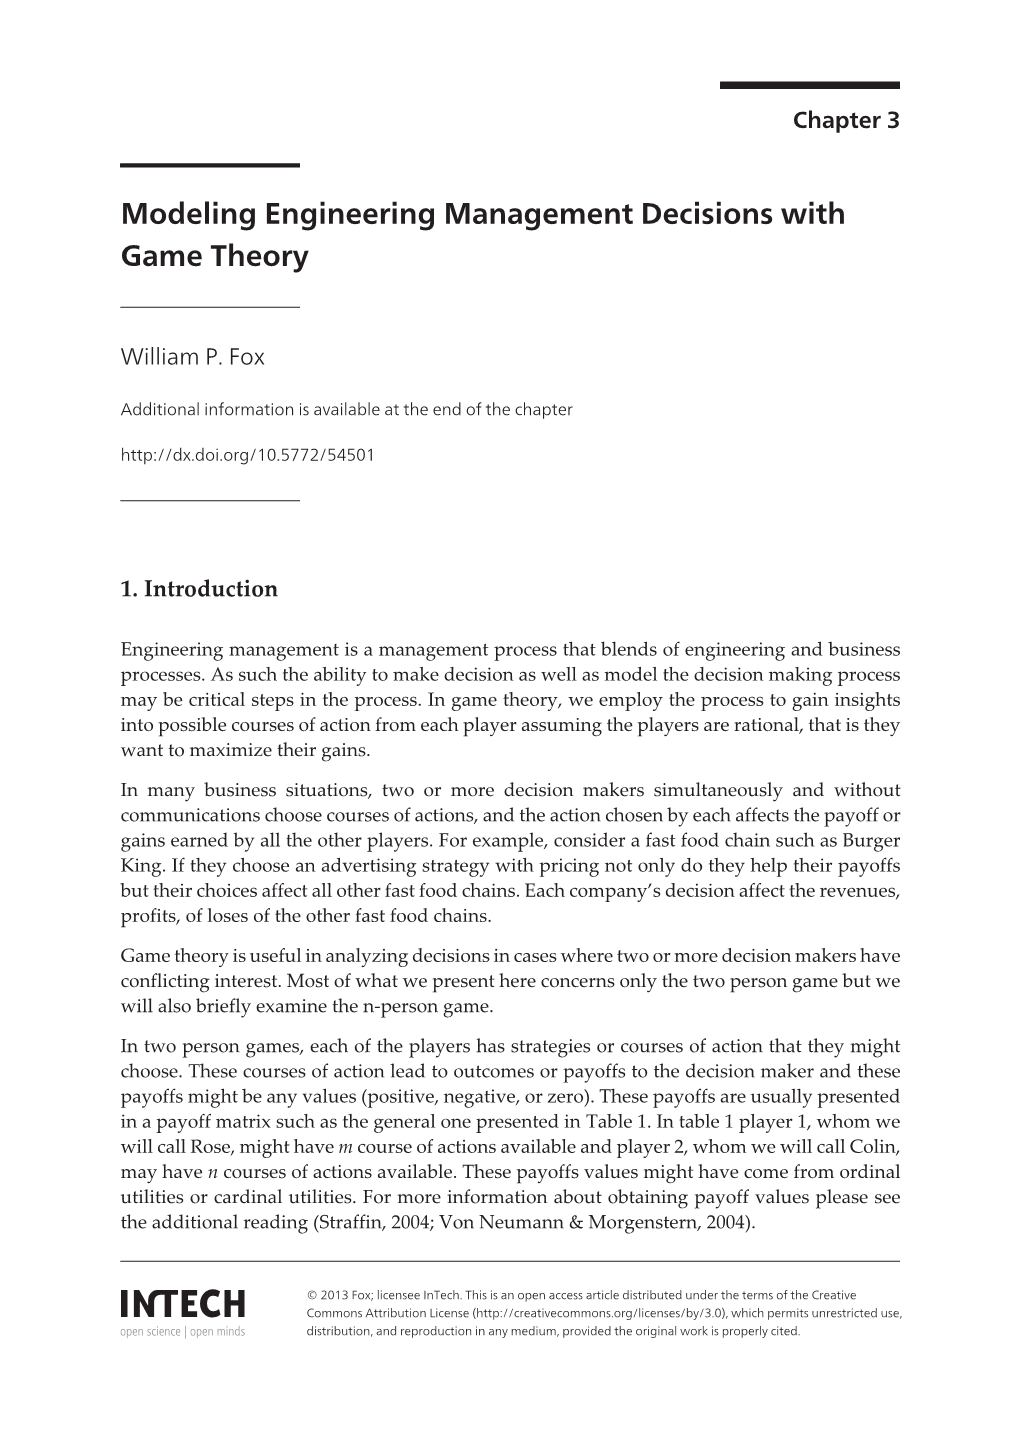 Modeling Engineering Management Decisions with Game Theory